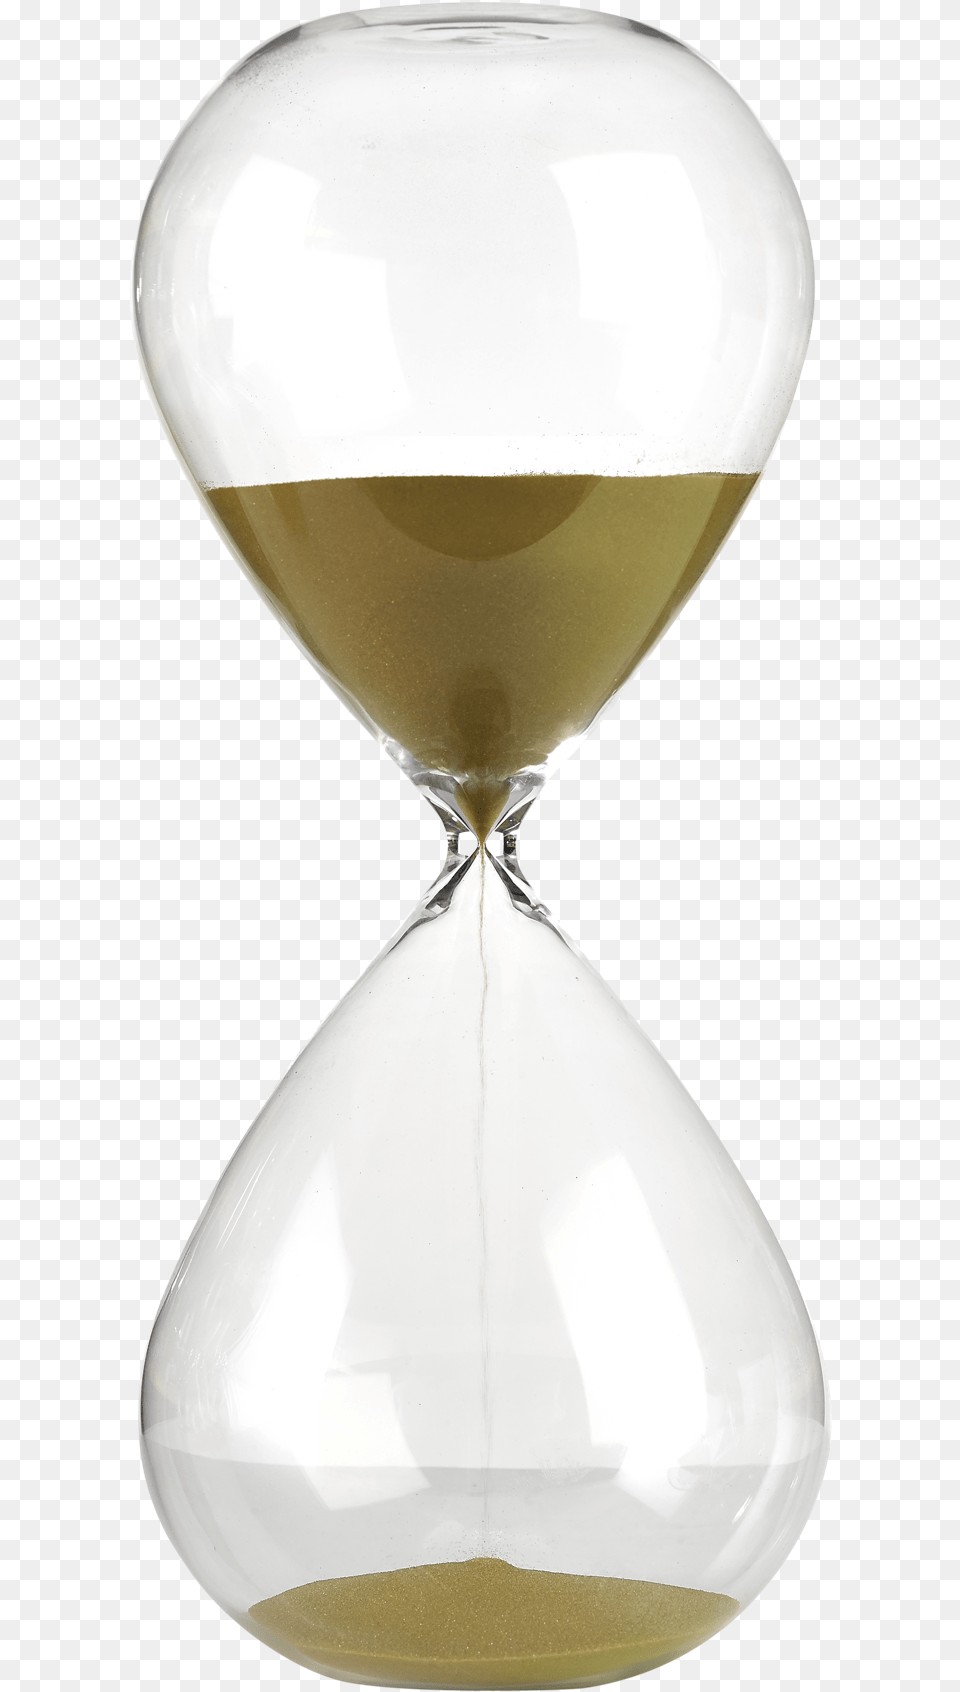 Hourglass, Alcohol, Beer, Beverage Png